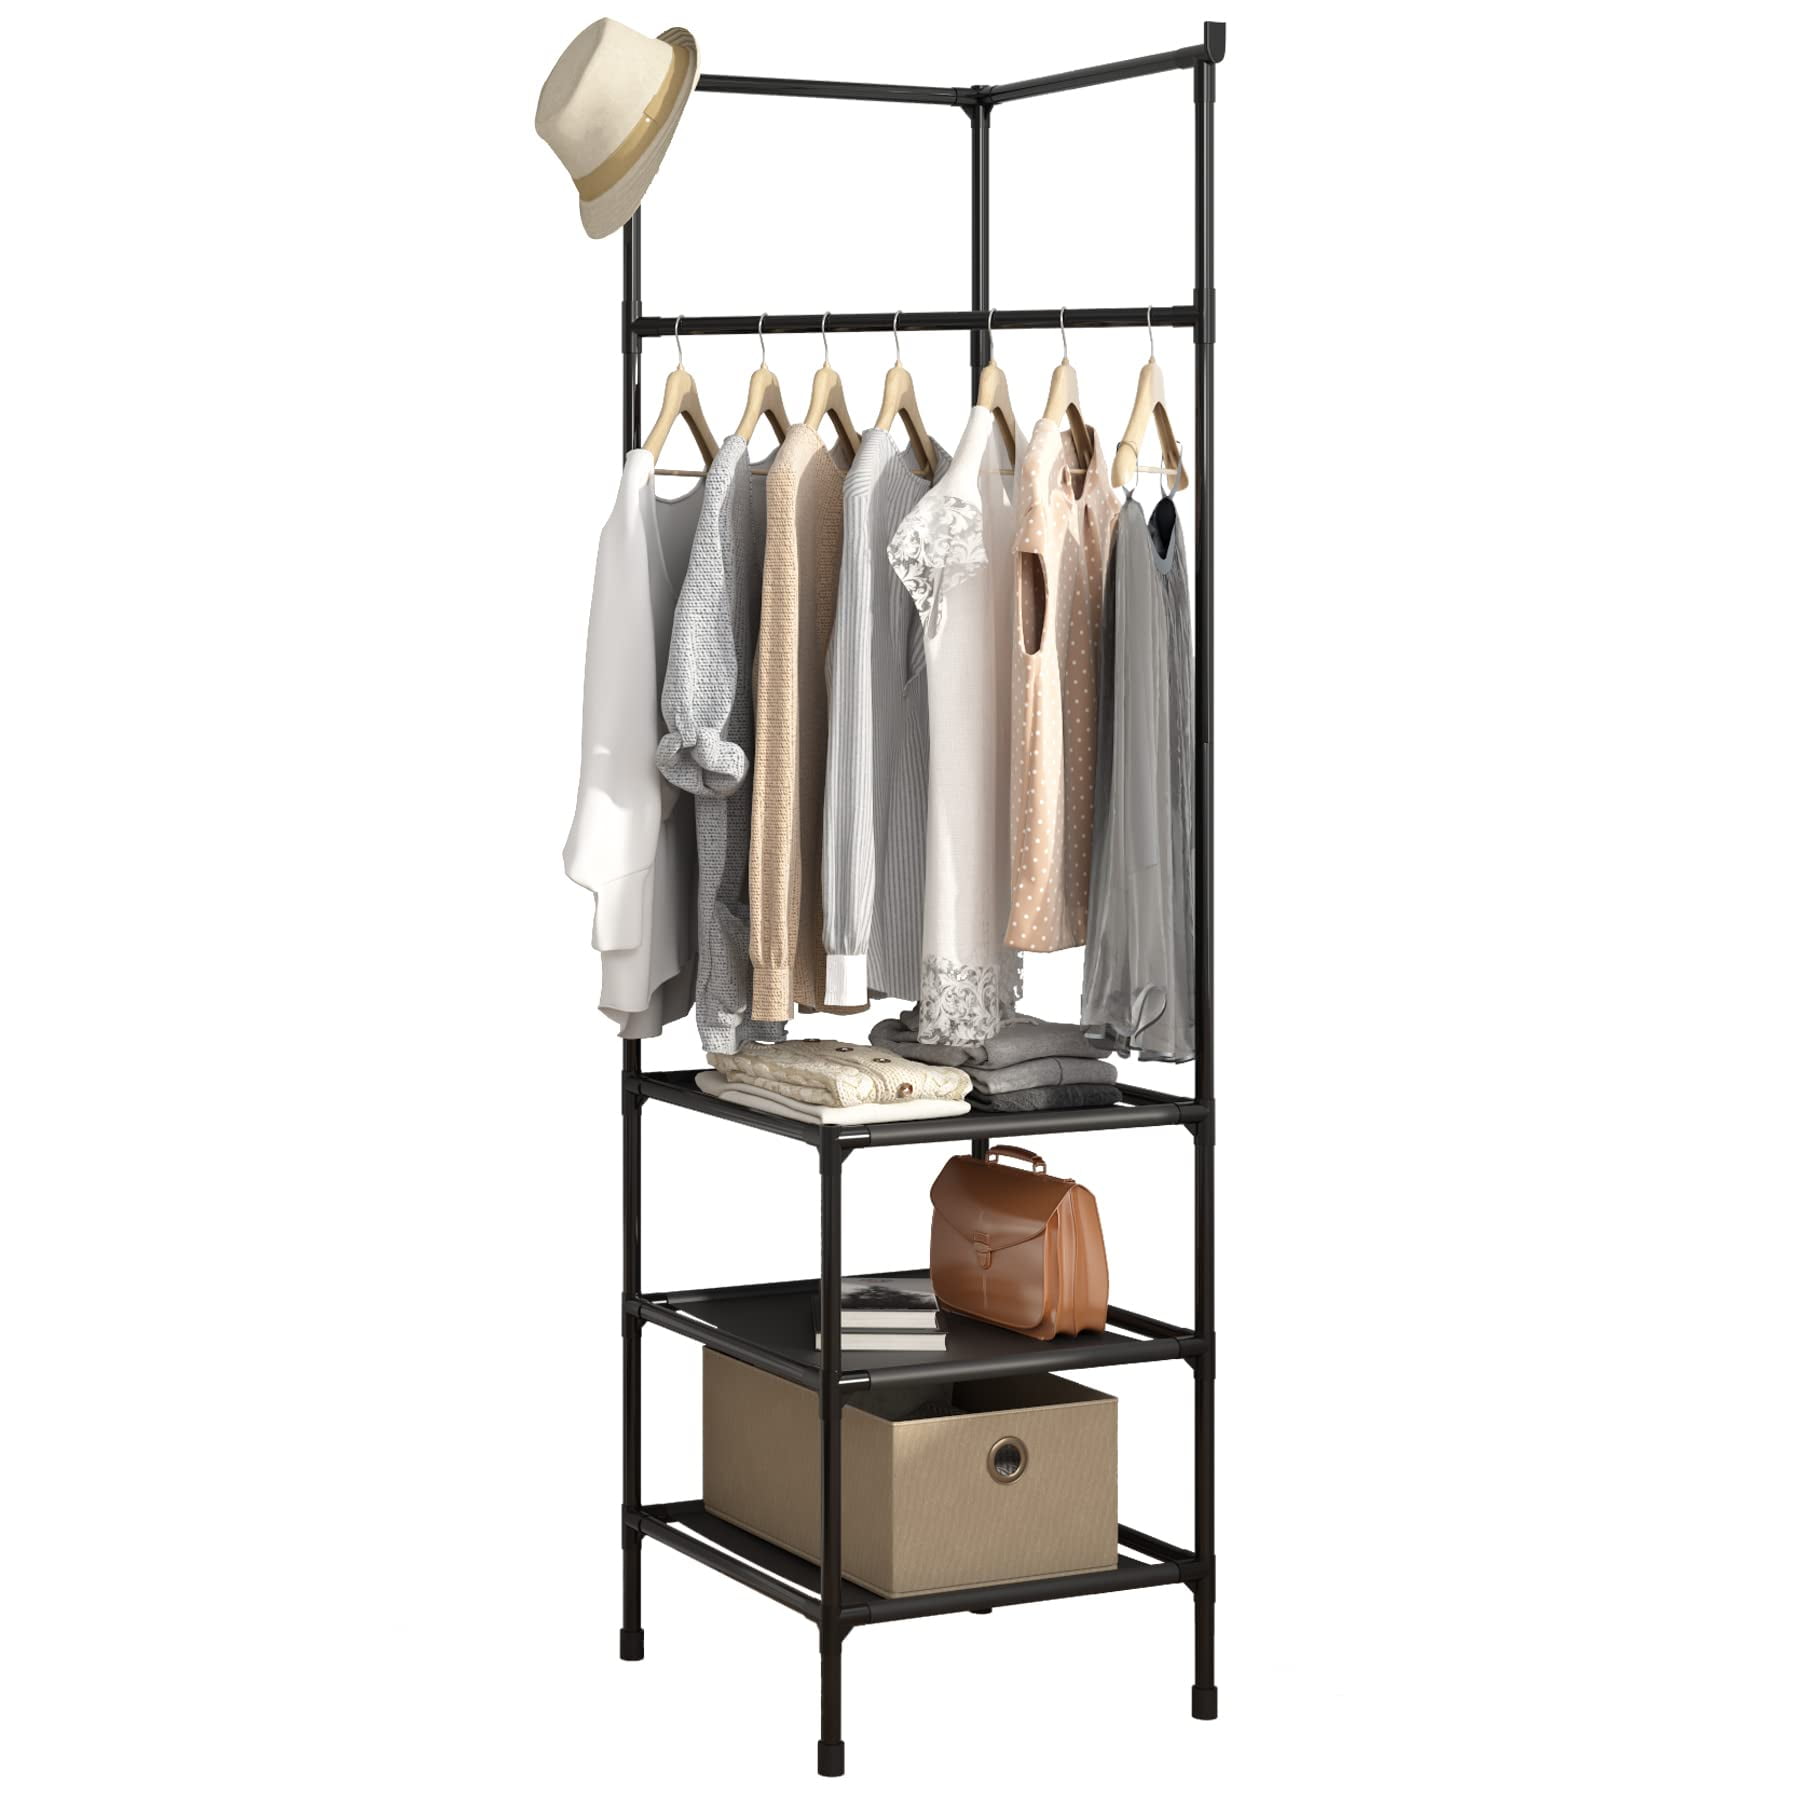 IMMEKEY Coat Rack with Shoe Bench Entryway, Hall Tree with 3 Storage ...